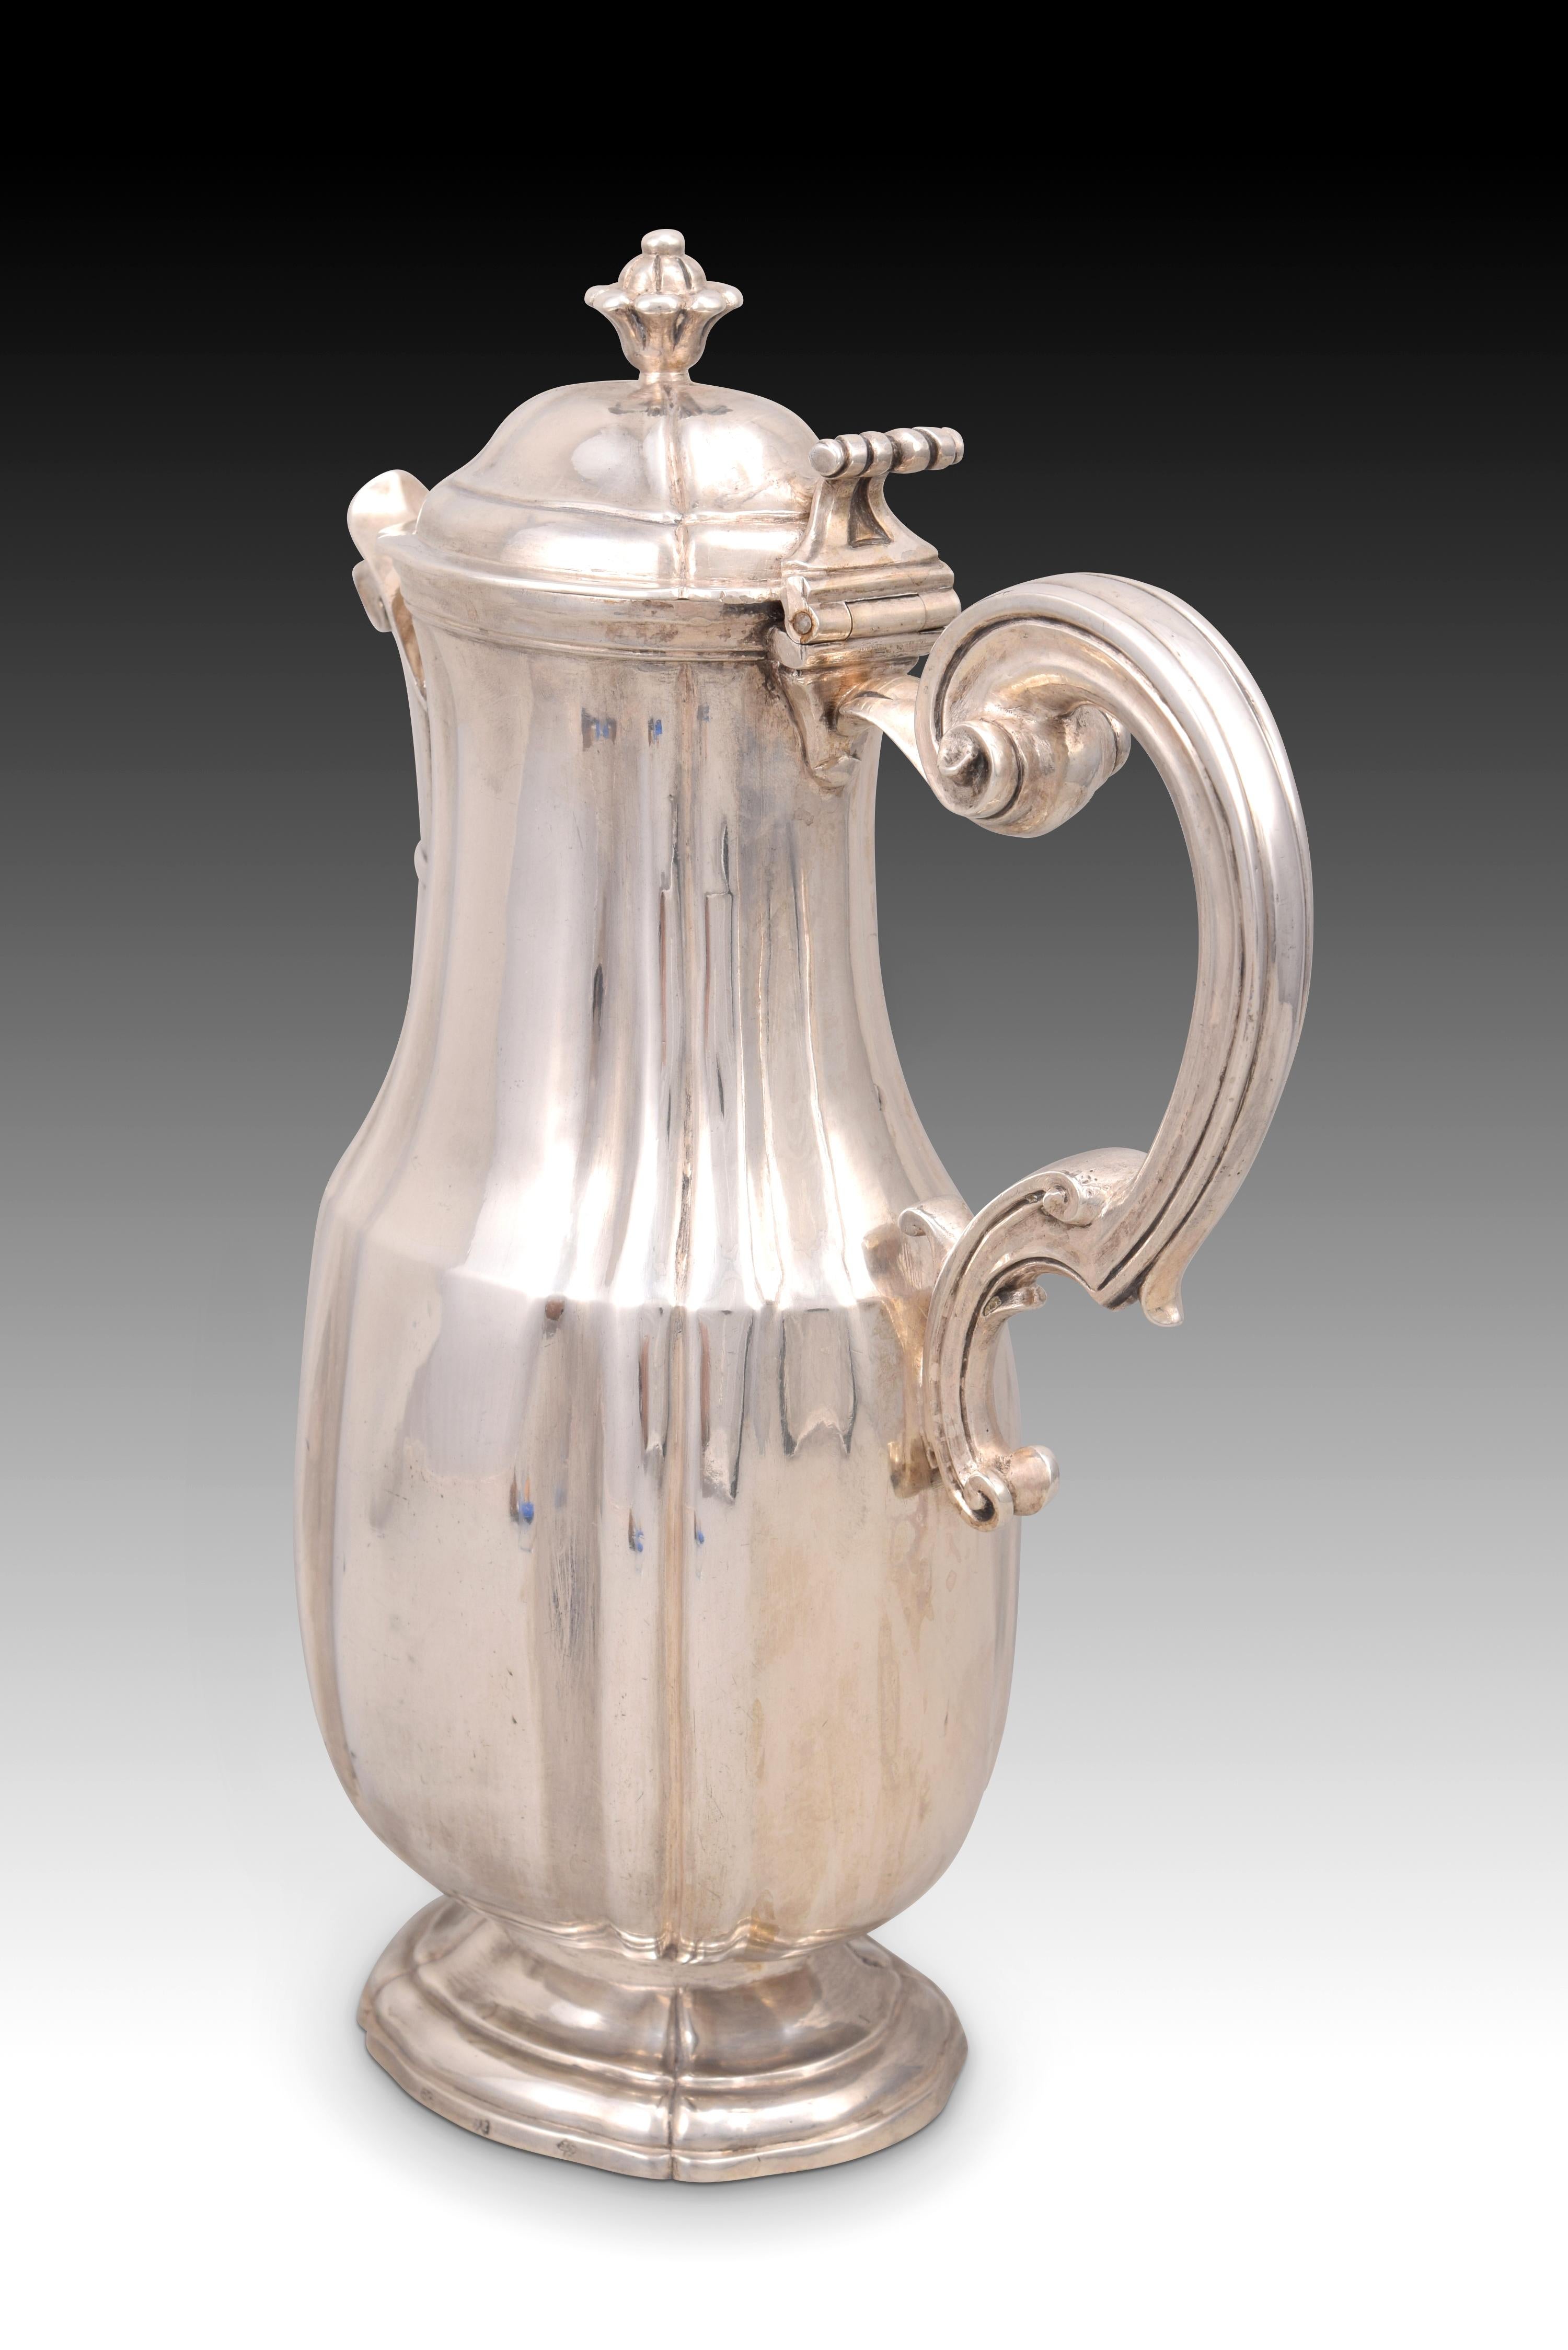 Jug or jug. Silver. DE SAN FAURÍ, Juan (1745-1785). Spain, Madrid, towards the last third of the 18th century. 
With contrast and burilada marks, and property name (Ochoa). 
The jug has an oval base with slight curves and a body divided into two